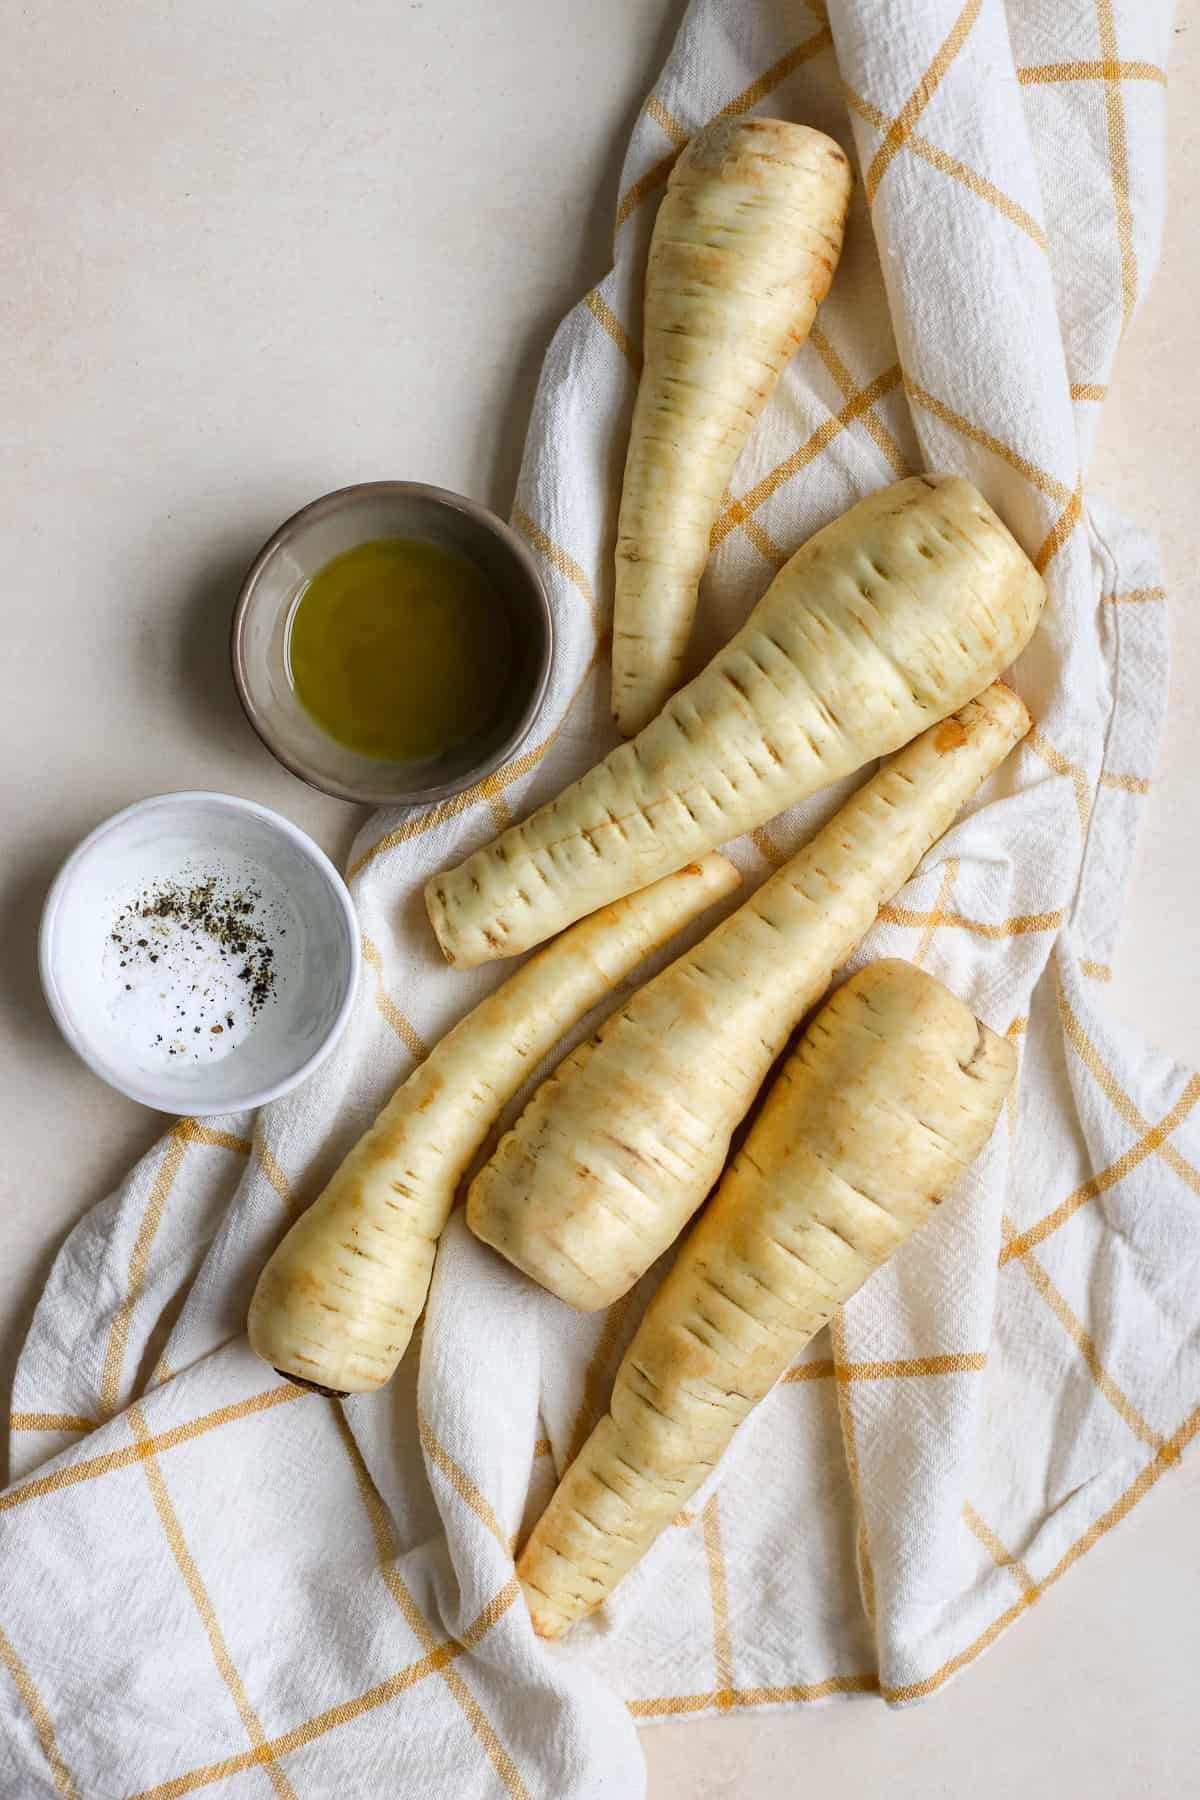 Whole raw parsnips on yellow and white checked linen with extra virgin olive oil, salt, and pepper on the side